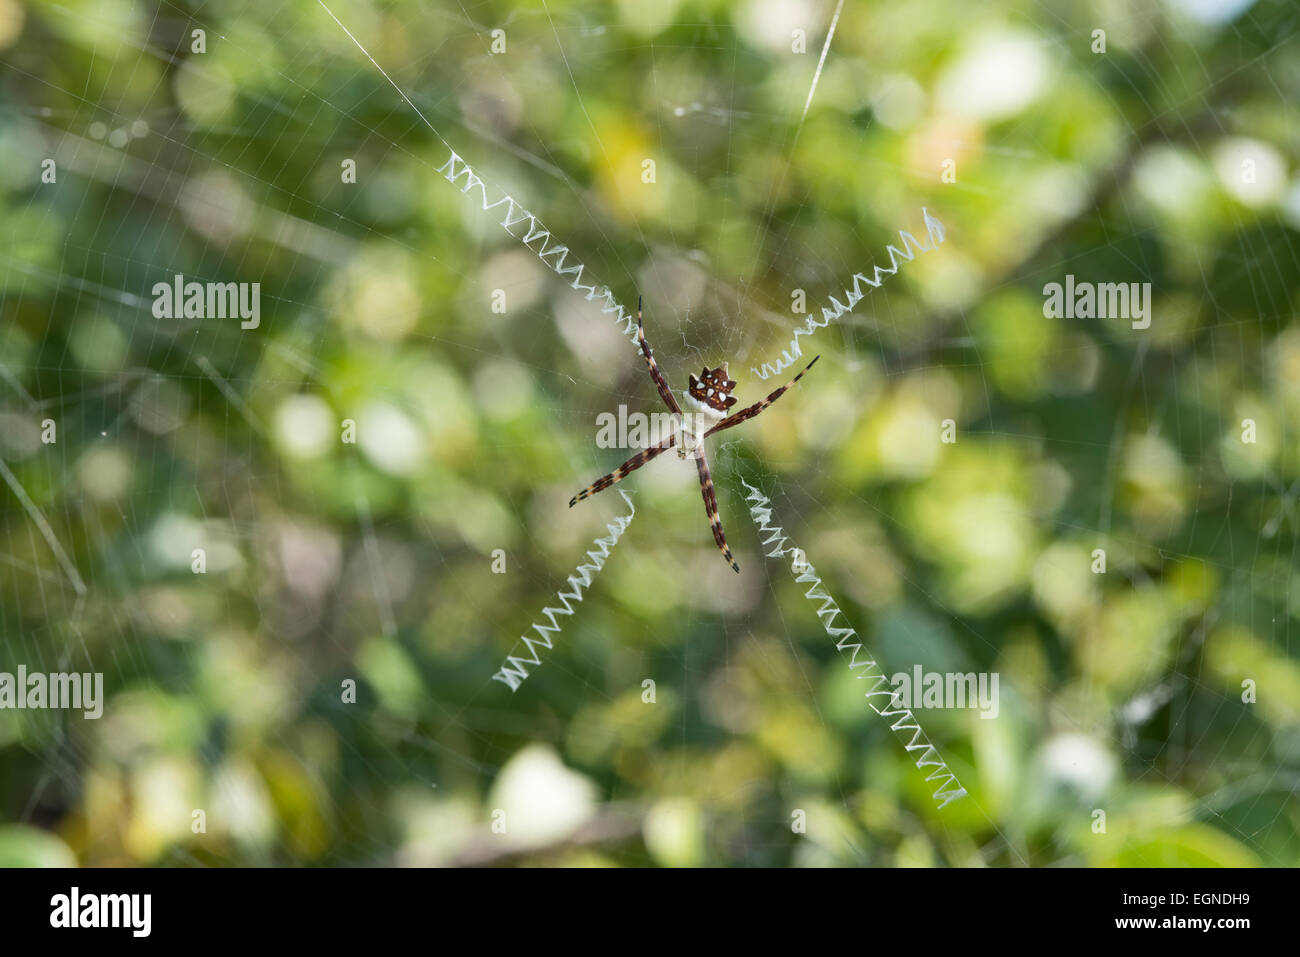 A silver argiope spider in it's hallmark x-shaped, zippered web. Stock Photo